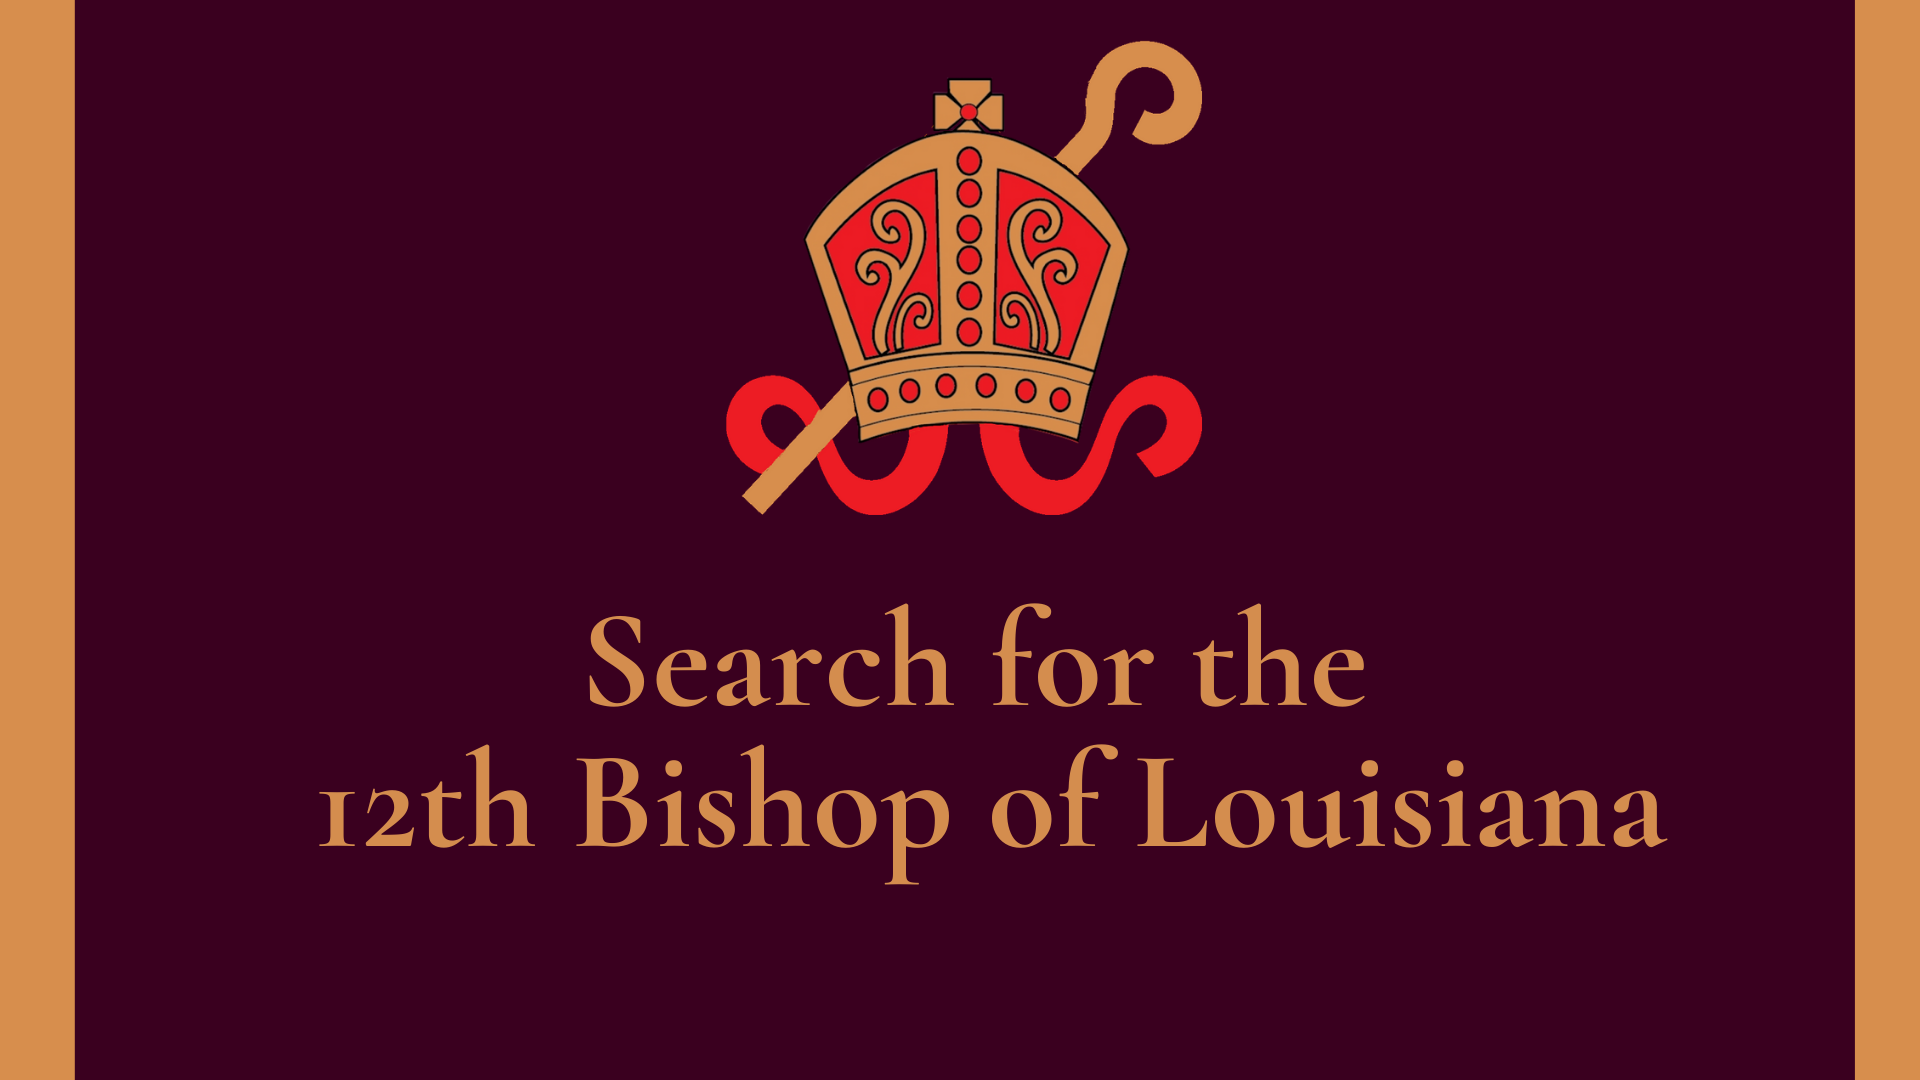 Diocesan Profile Published, Now Accepting Nominations